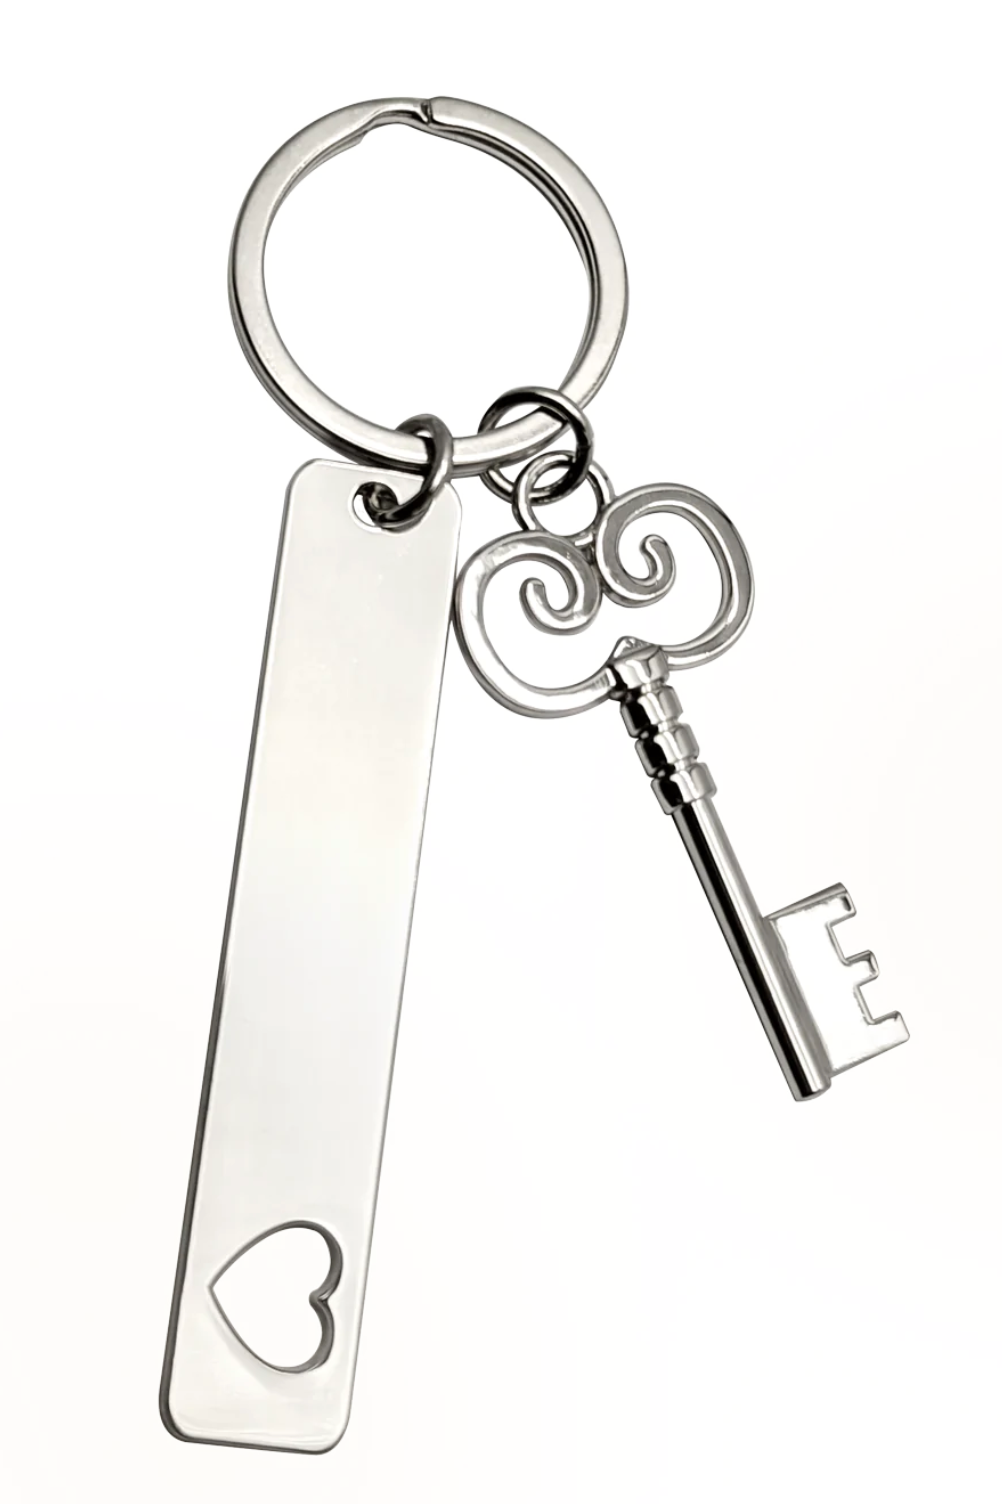 Key Ring Key Chain Large Antique Key and Bar with cutout Heart 2 charms can be engraved (KHBAR)